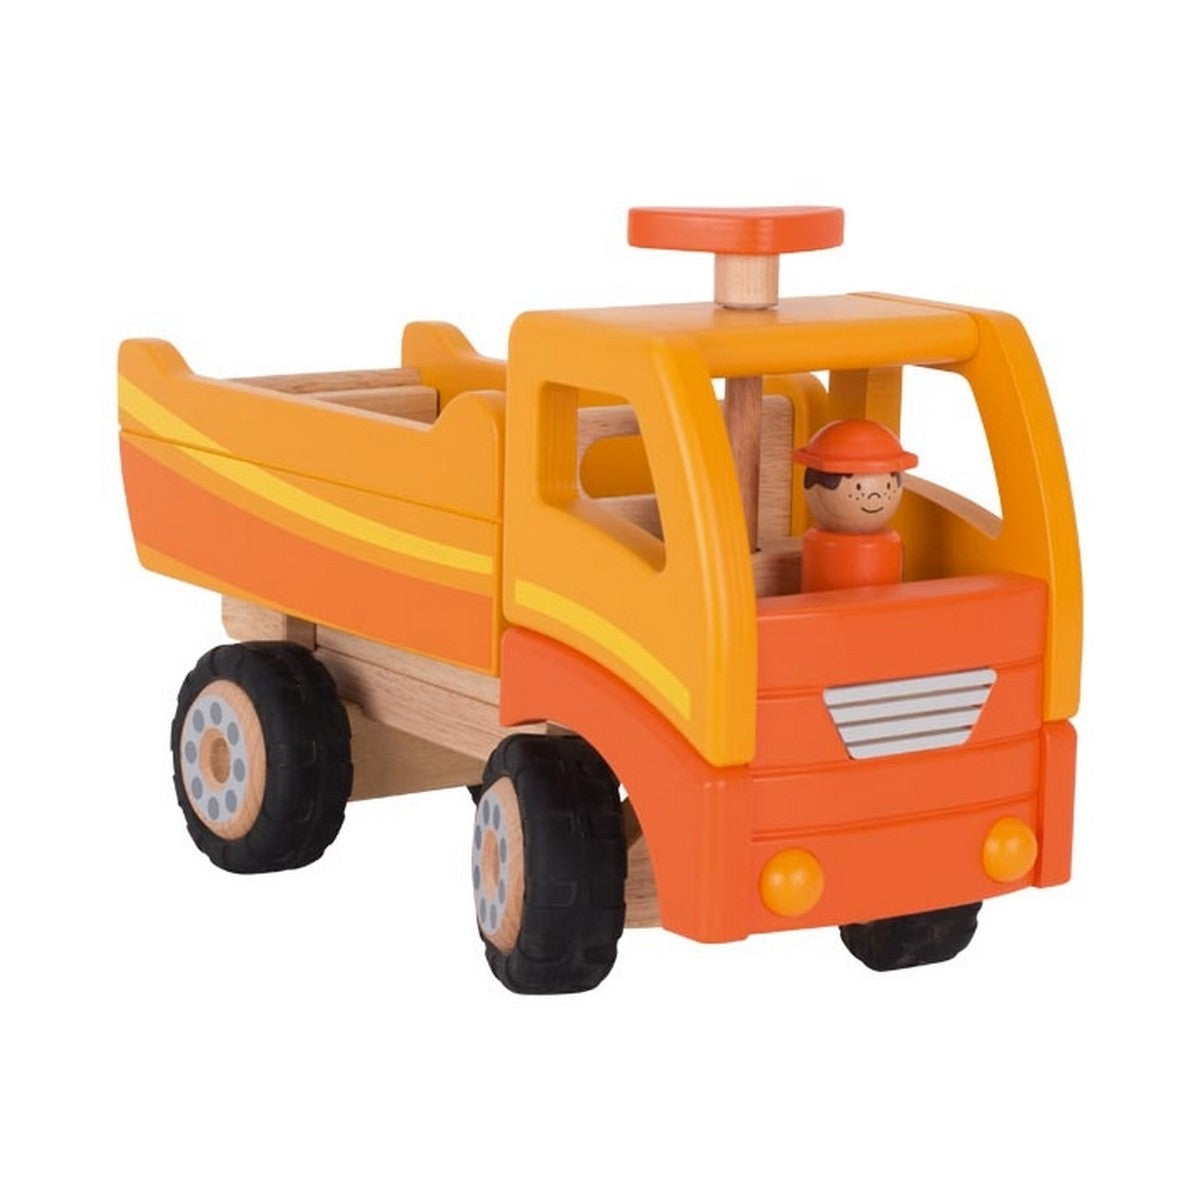 Wooden Toys > Vehicles